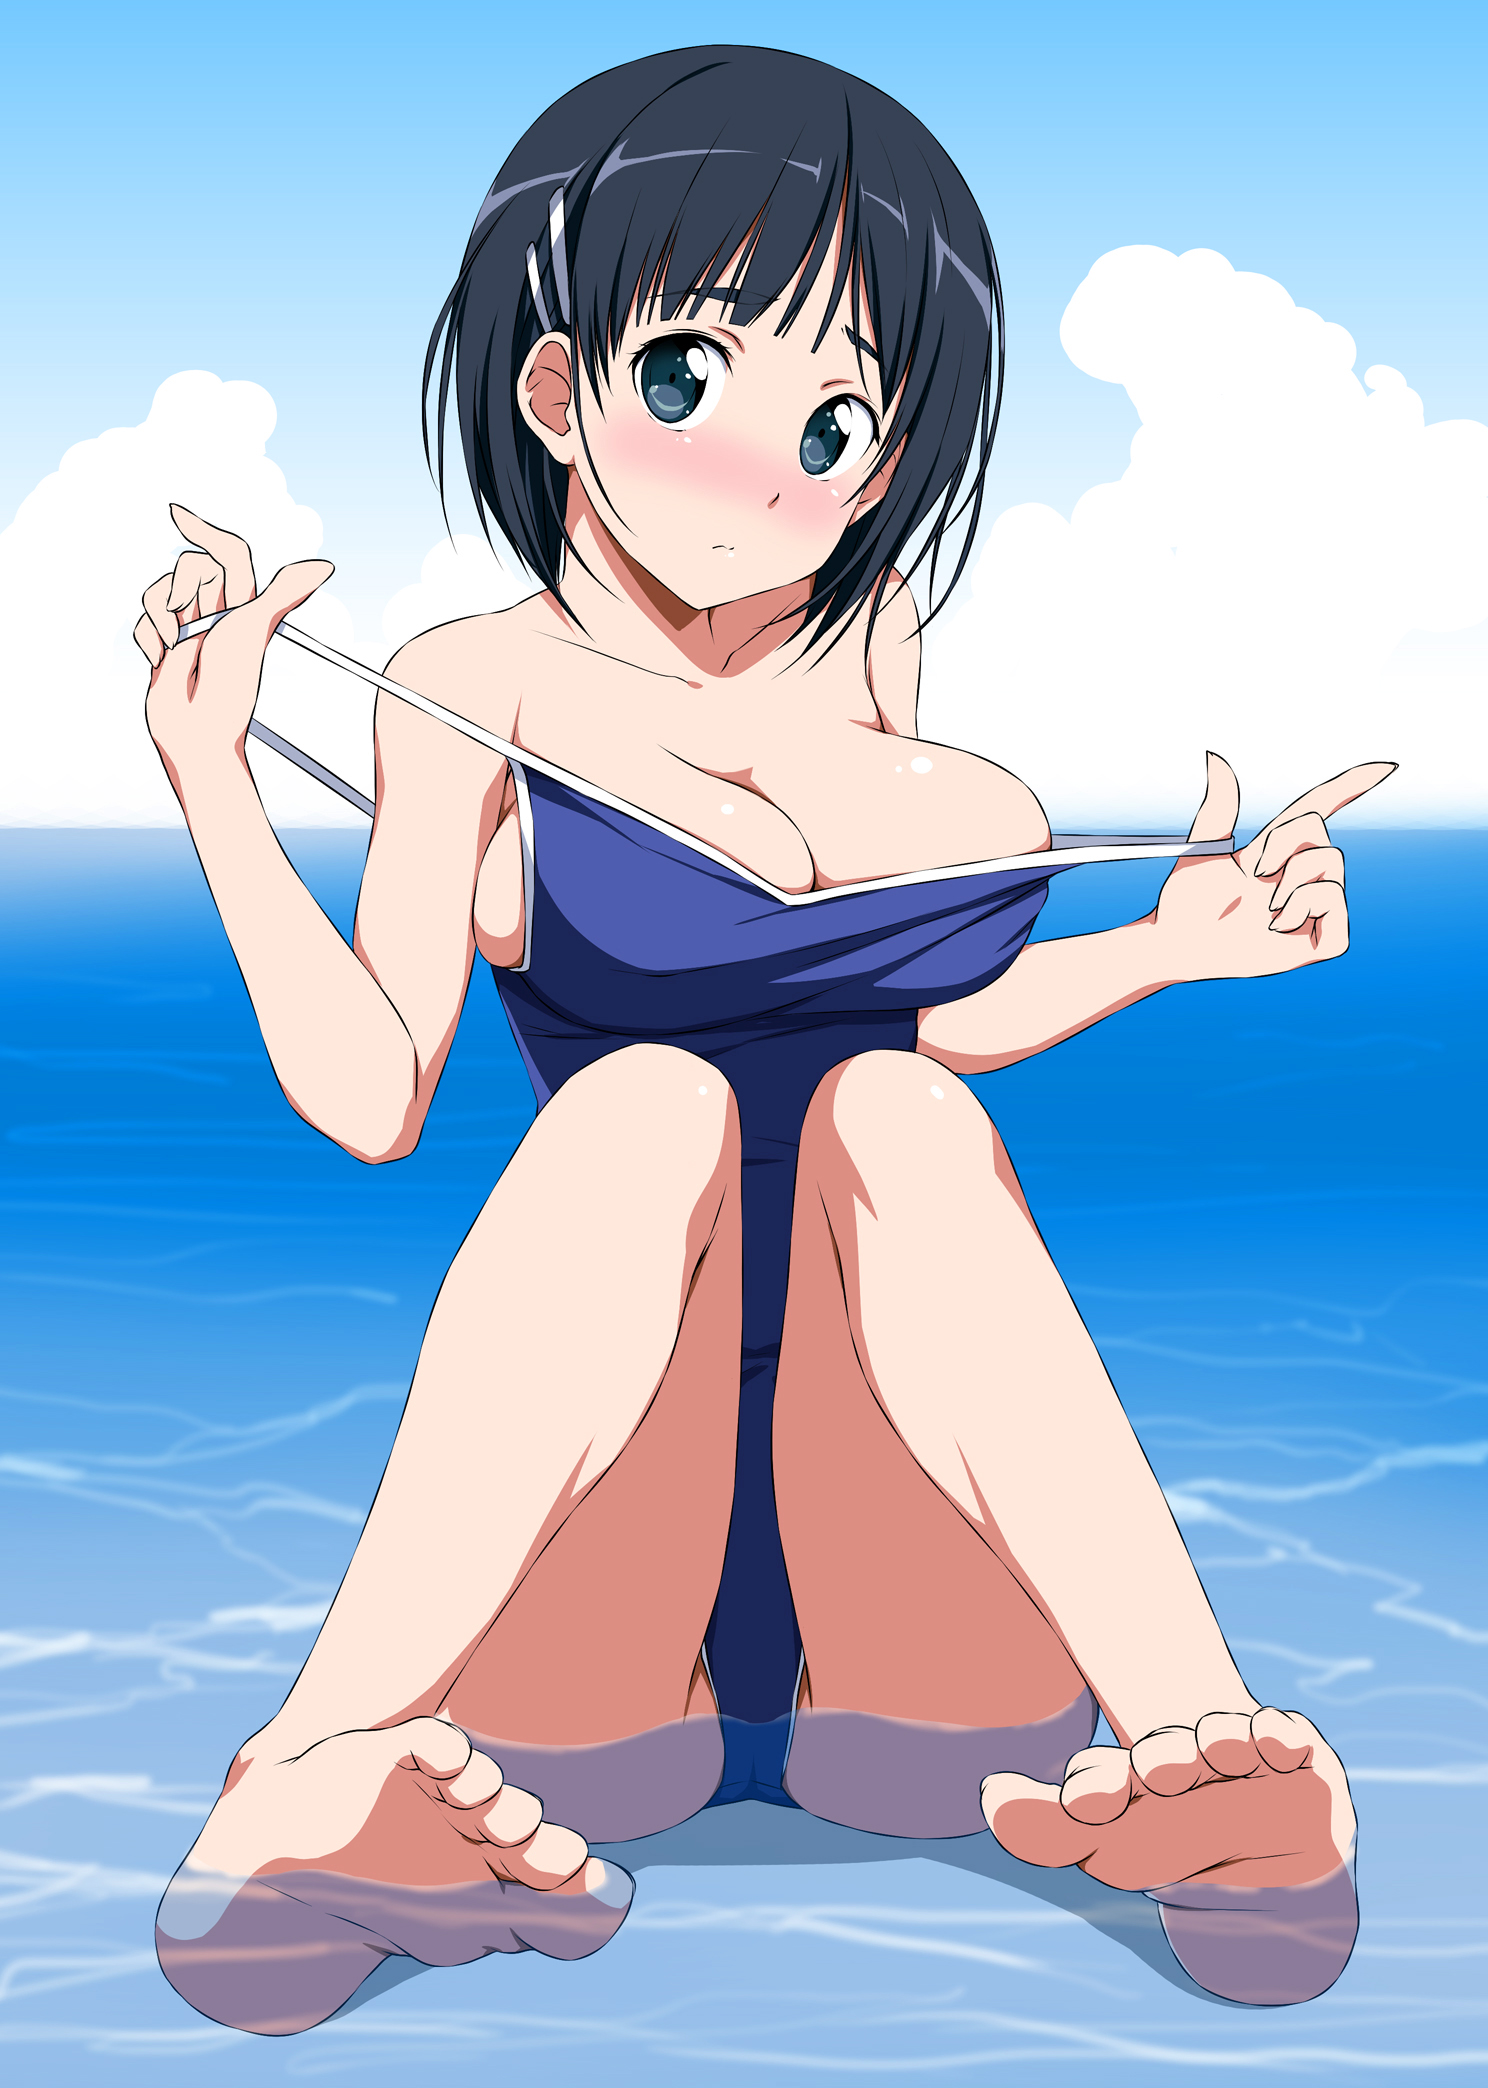 Big Boobs Cleavage Cameltoe Pulling Clothing Short Hair Anime 